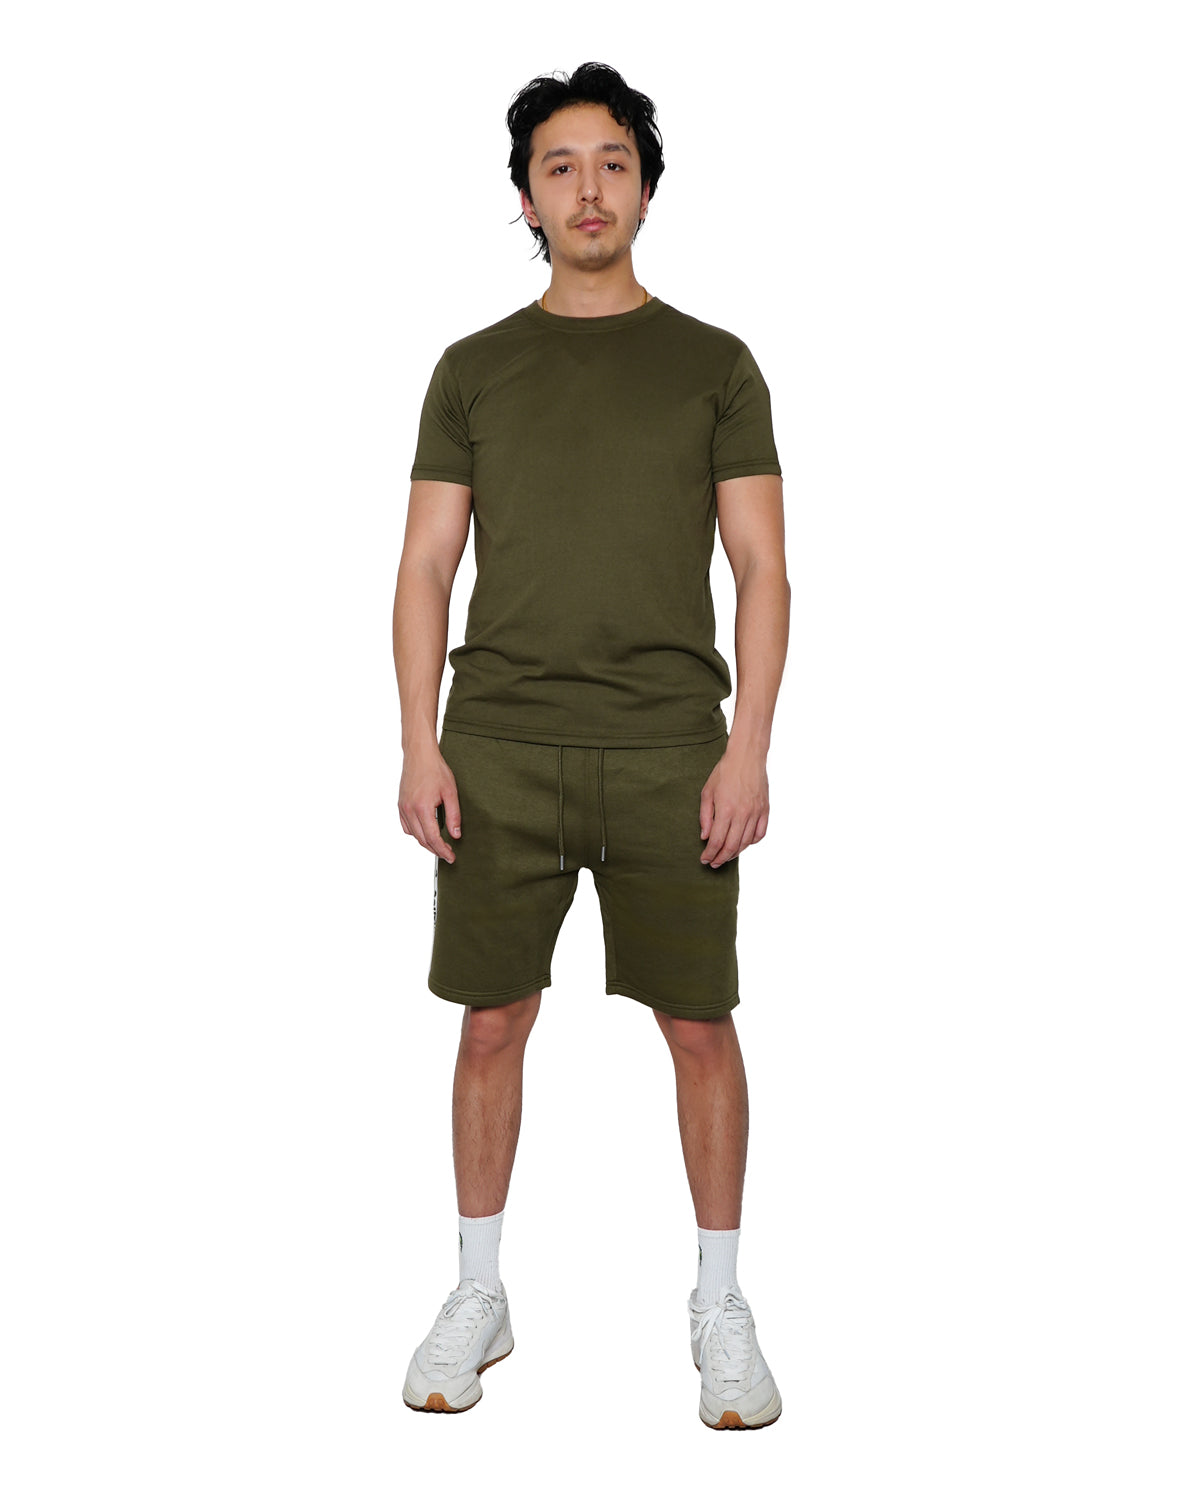 Olive Short Set with Jersey Crew Neck Jumper and Fleece Shorts (2058)